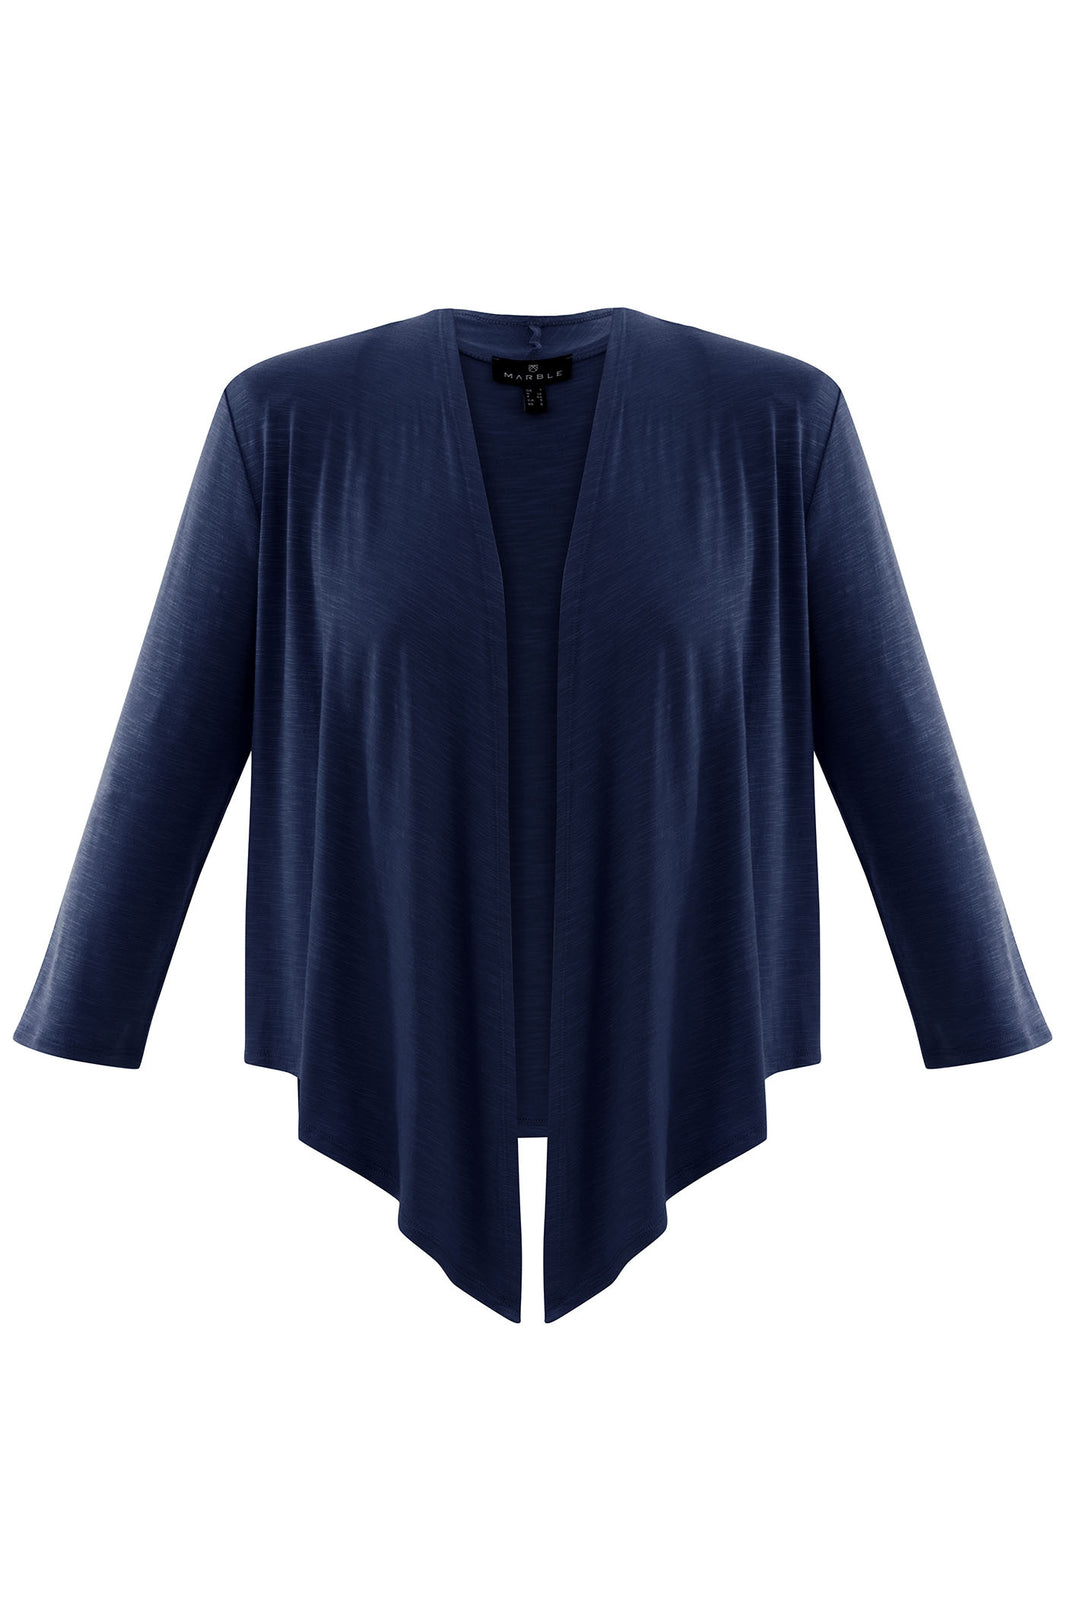 Marble Fashions 6541 103 Navy Waterfall Jersey Cardigan Shrug - Experience Boutique